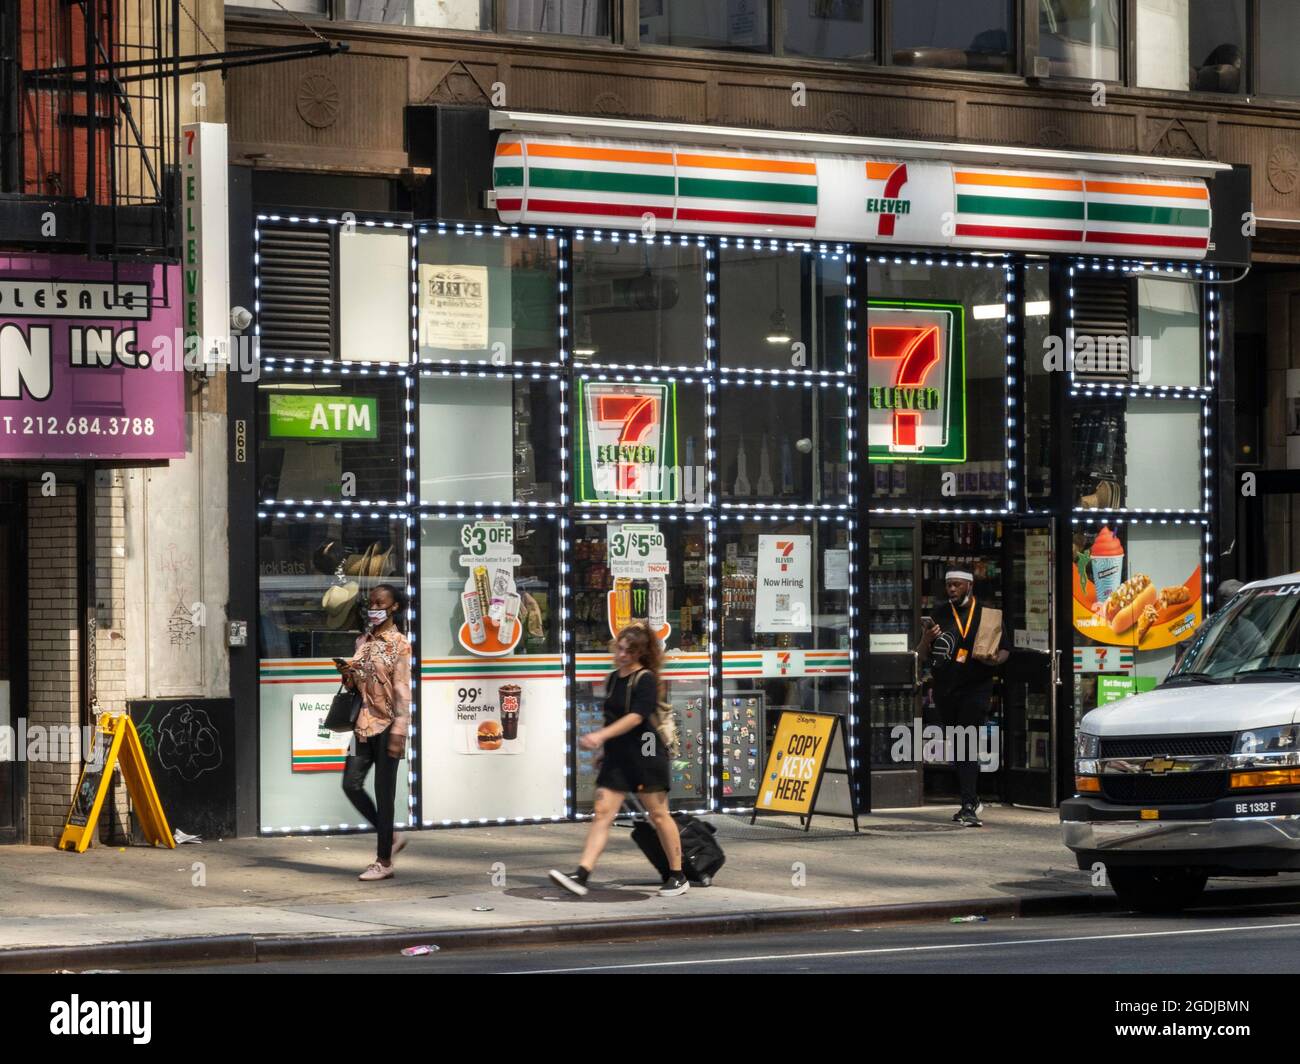 7 Eleven Convenience Store on Avenue of the Americas, NYC,USA, 2021 Stock Photo